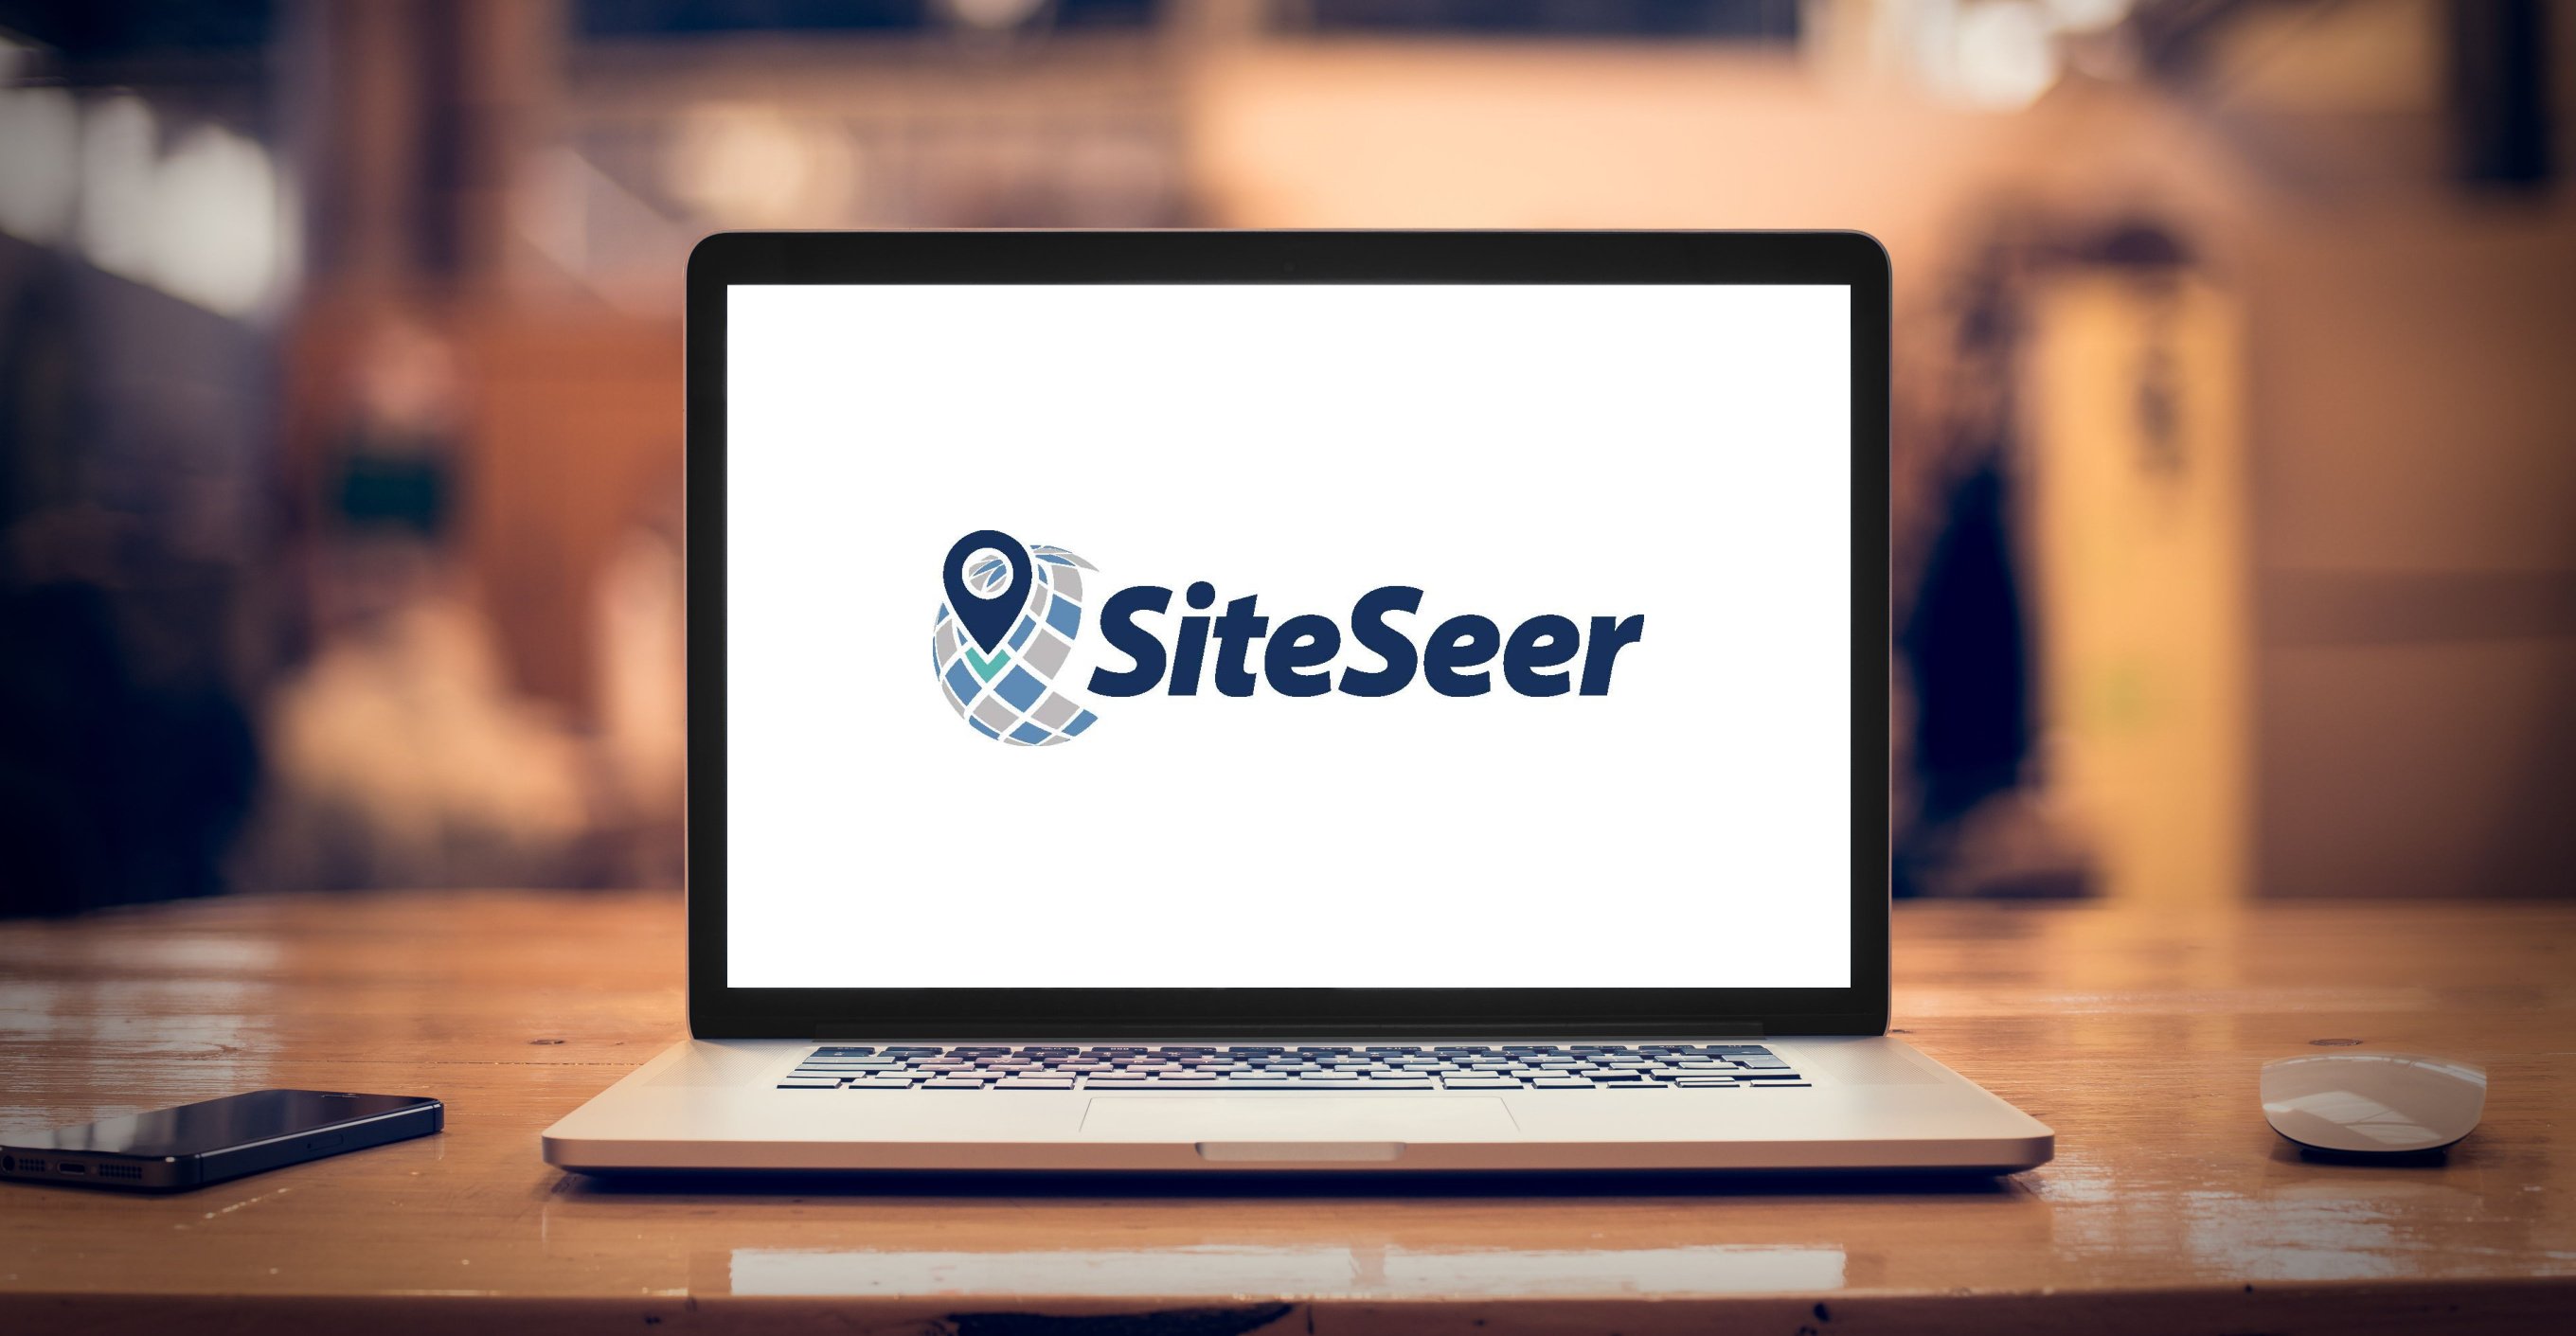 Duke University engineering students used SiteSeer in a recent project